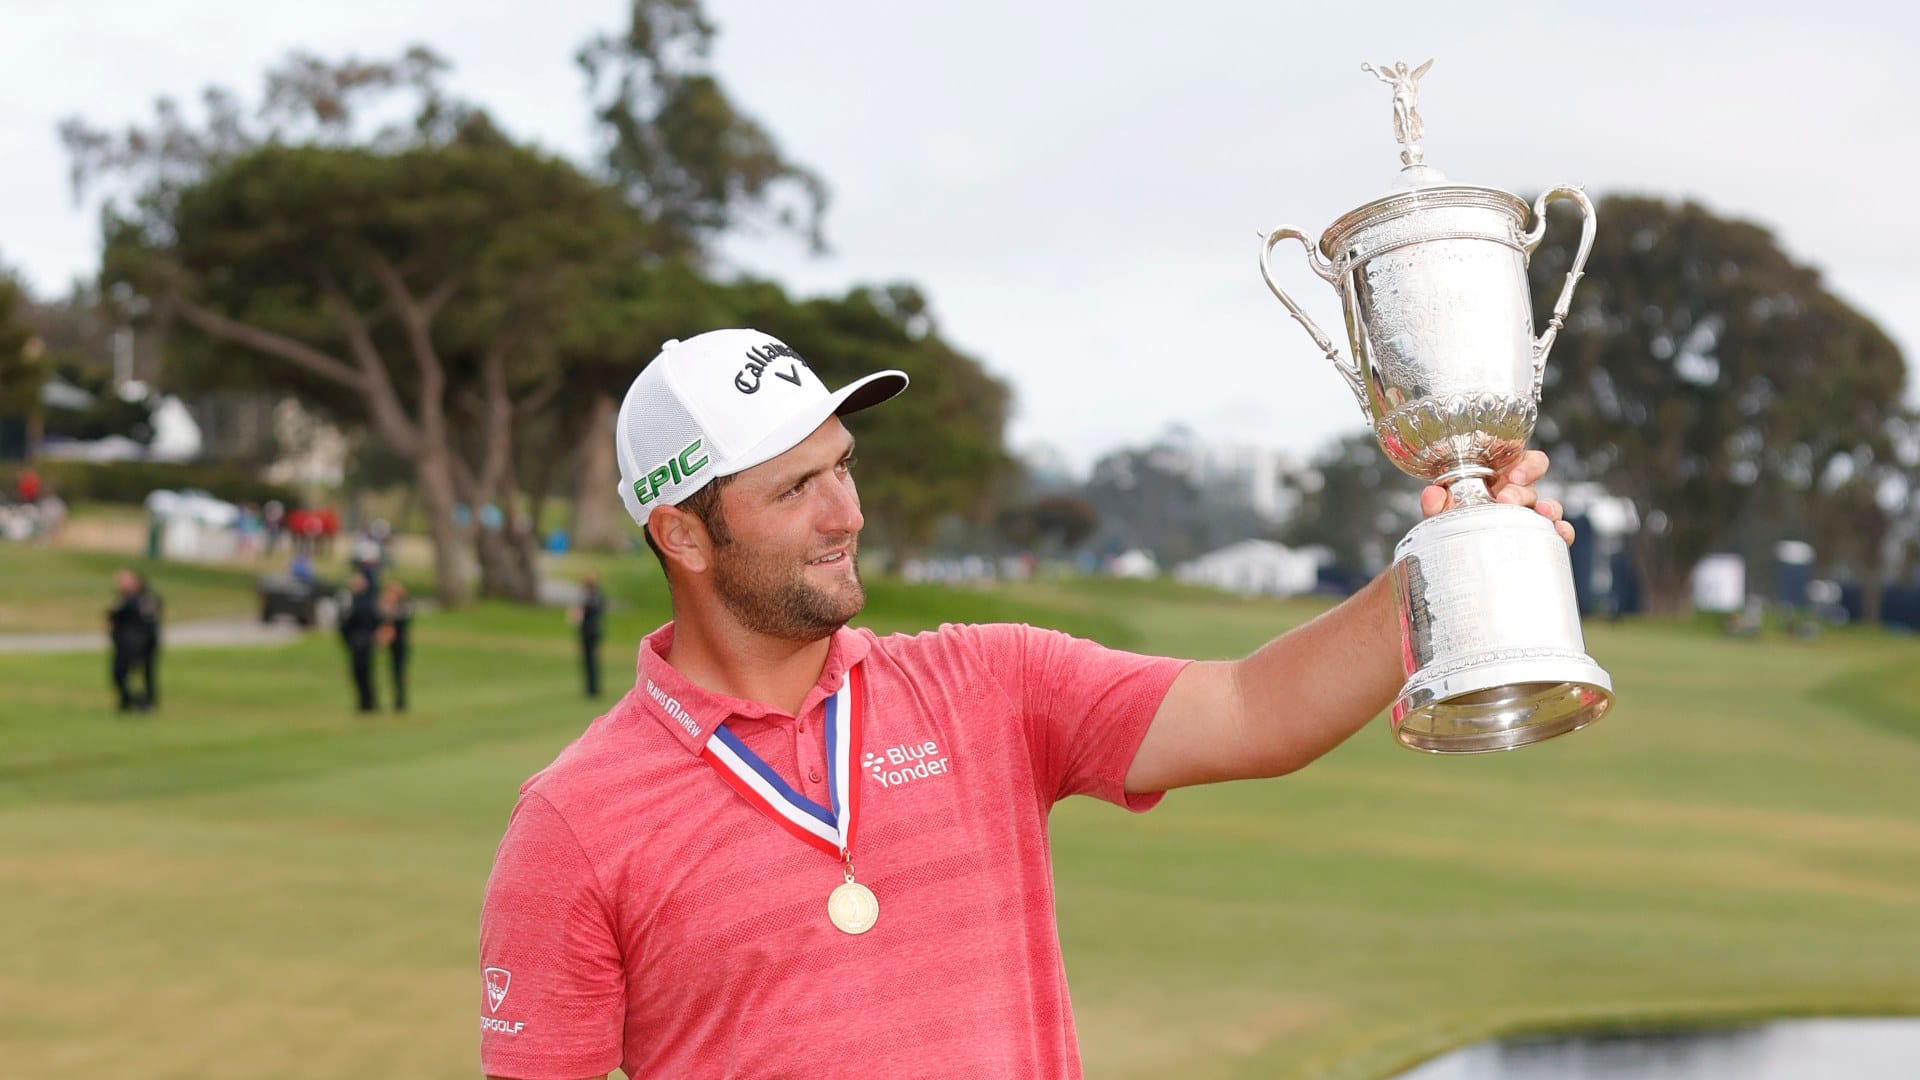 Jon Rahm of Spain celebrates with the trophy after winning during the final round of the 2021 U.S. Open at Torrey Pines Golf Course (South Course) on June 20, 2021 in San Diego, California. (Photo by Ezra Shaw/Getty Images)